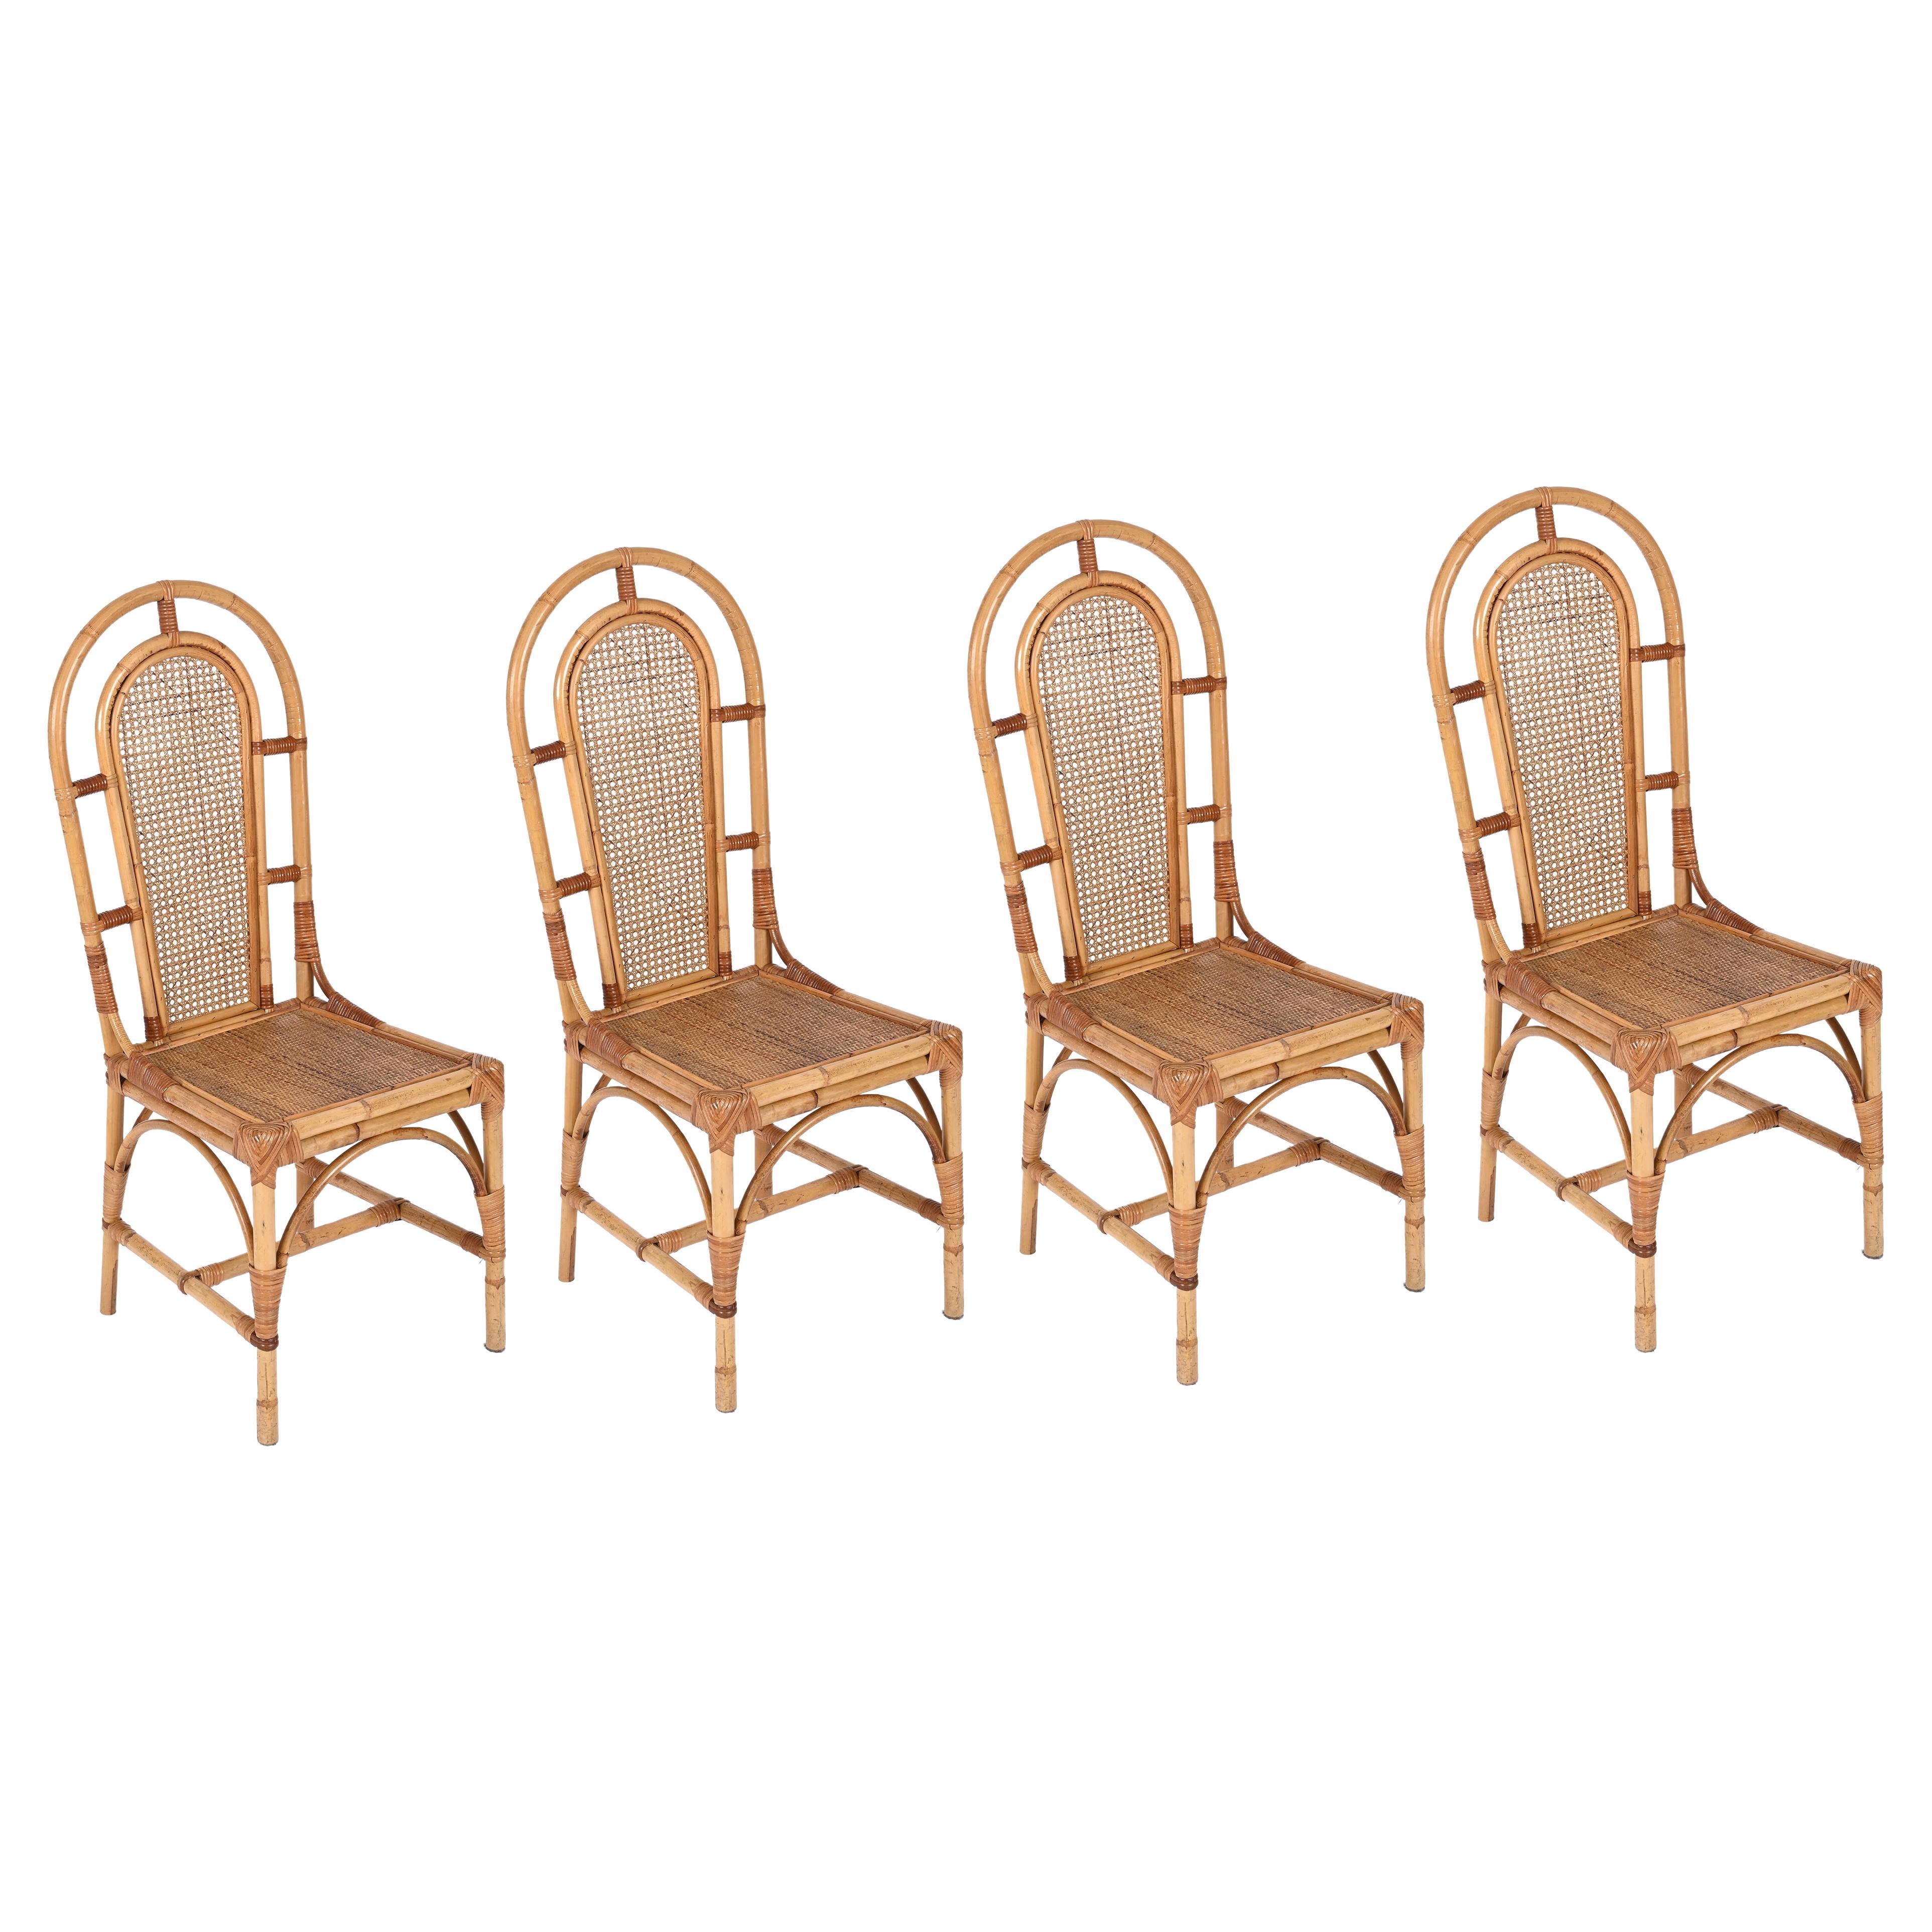 Sef of Four Bamboo and Vienna Straw Chairs, Vivai Del Sud, Italy 1970s